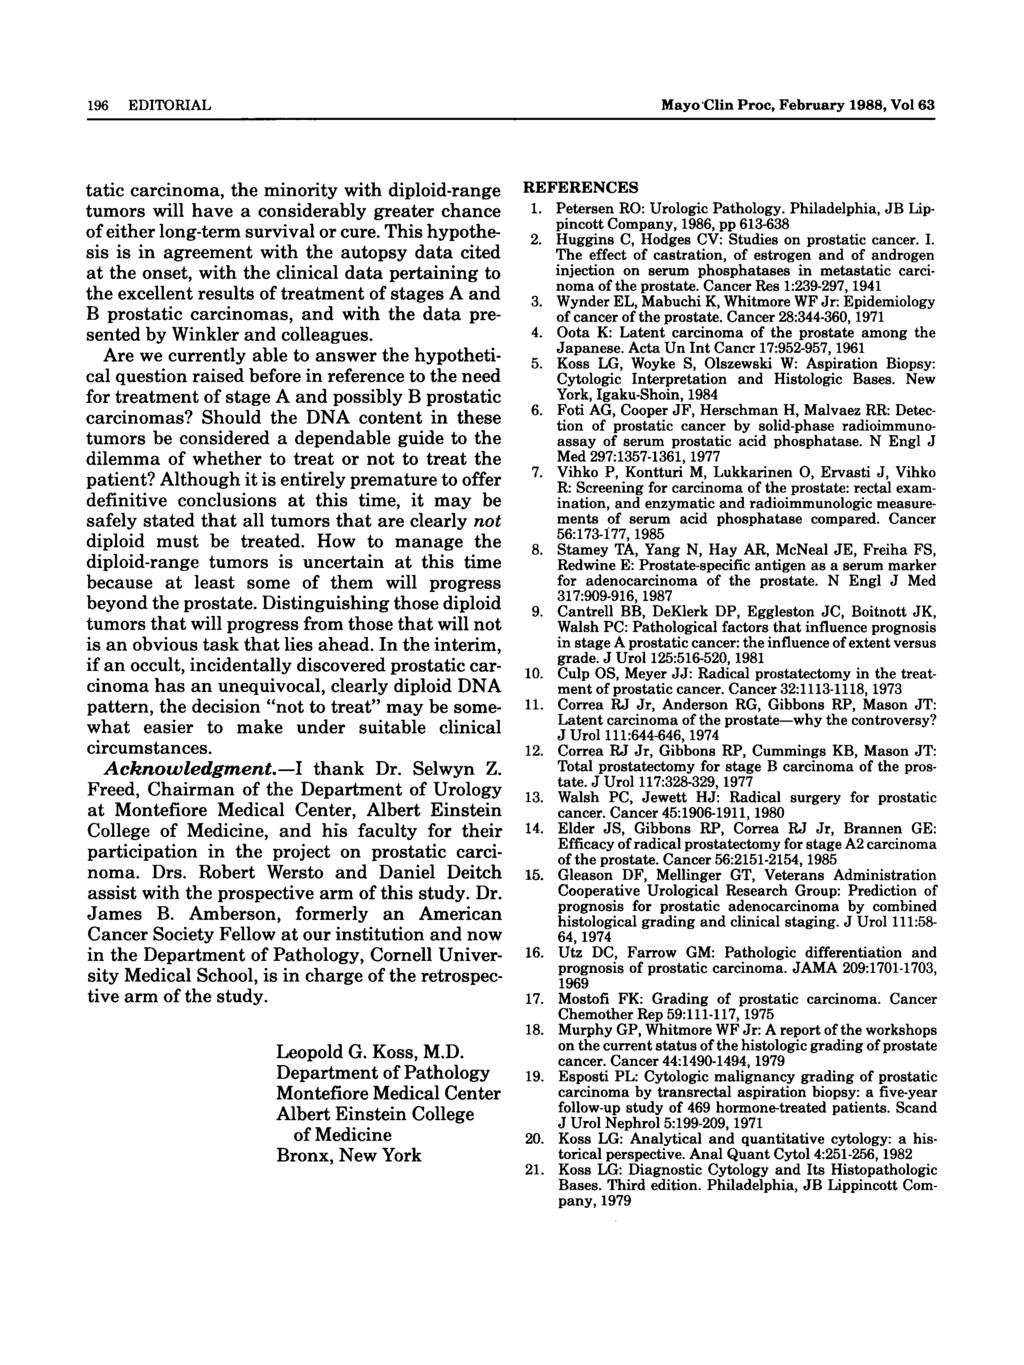 196 EDITORIAL Mayo Clin Proc, February 1988, Vol 63 tatic carcinoma, the minority with diploid-range tumors will have a considerably greater chance of either long-term survival or cure.